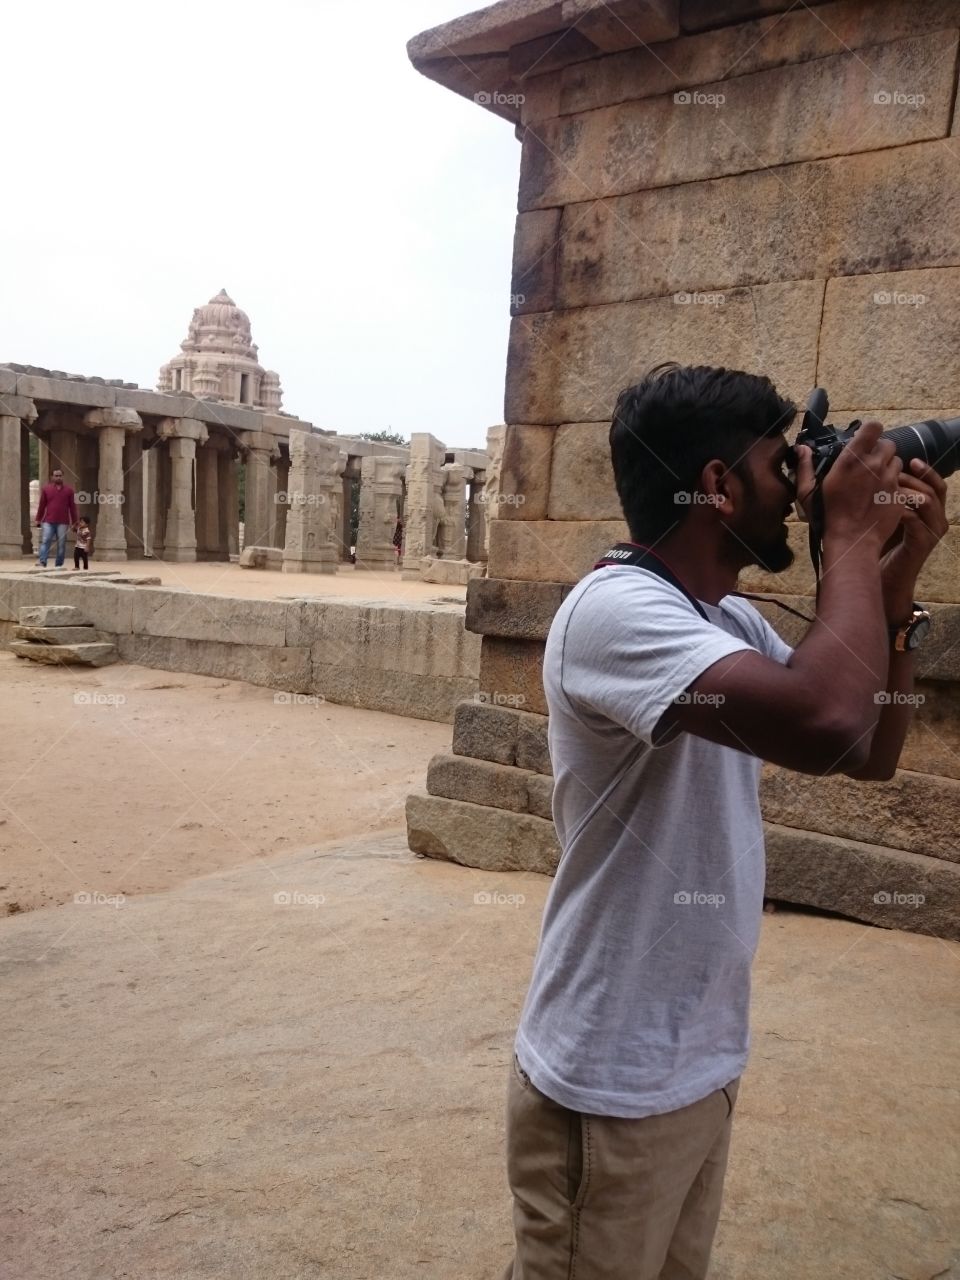 Photographer in action